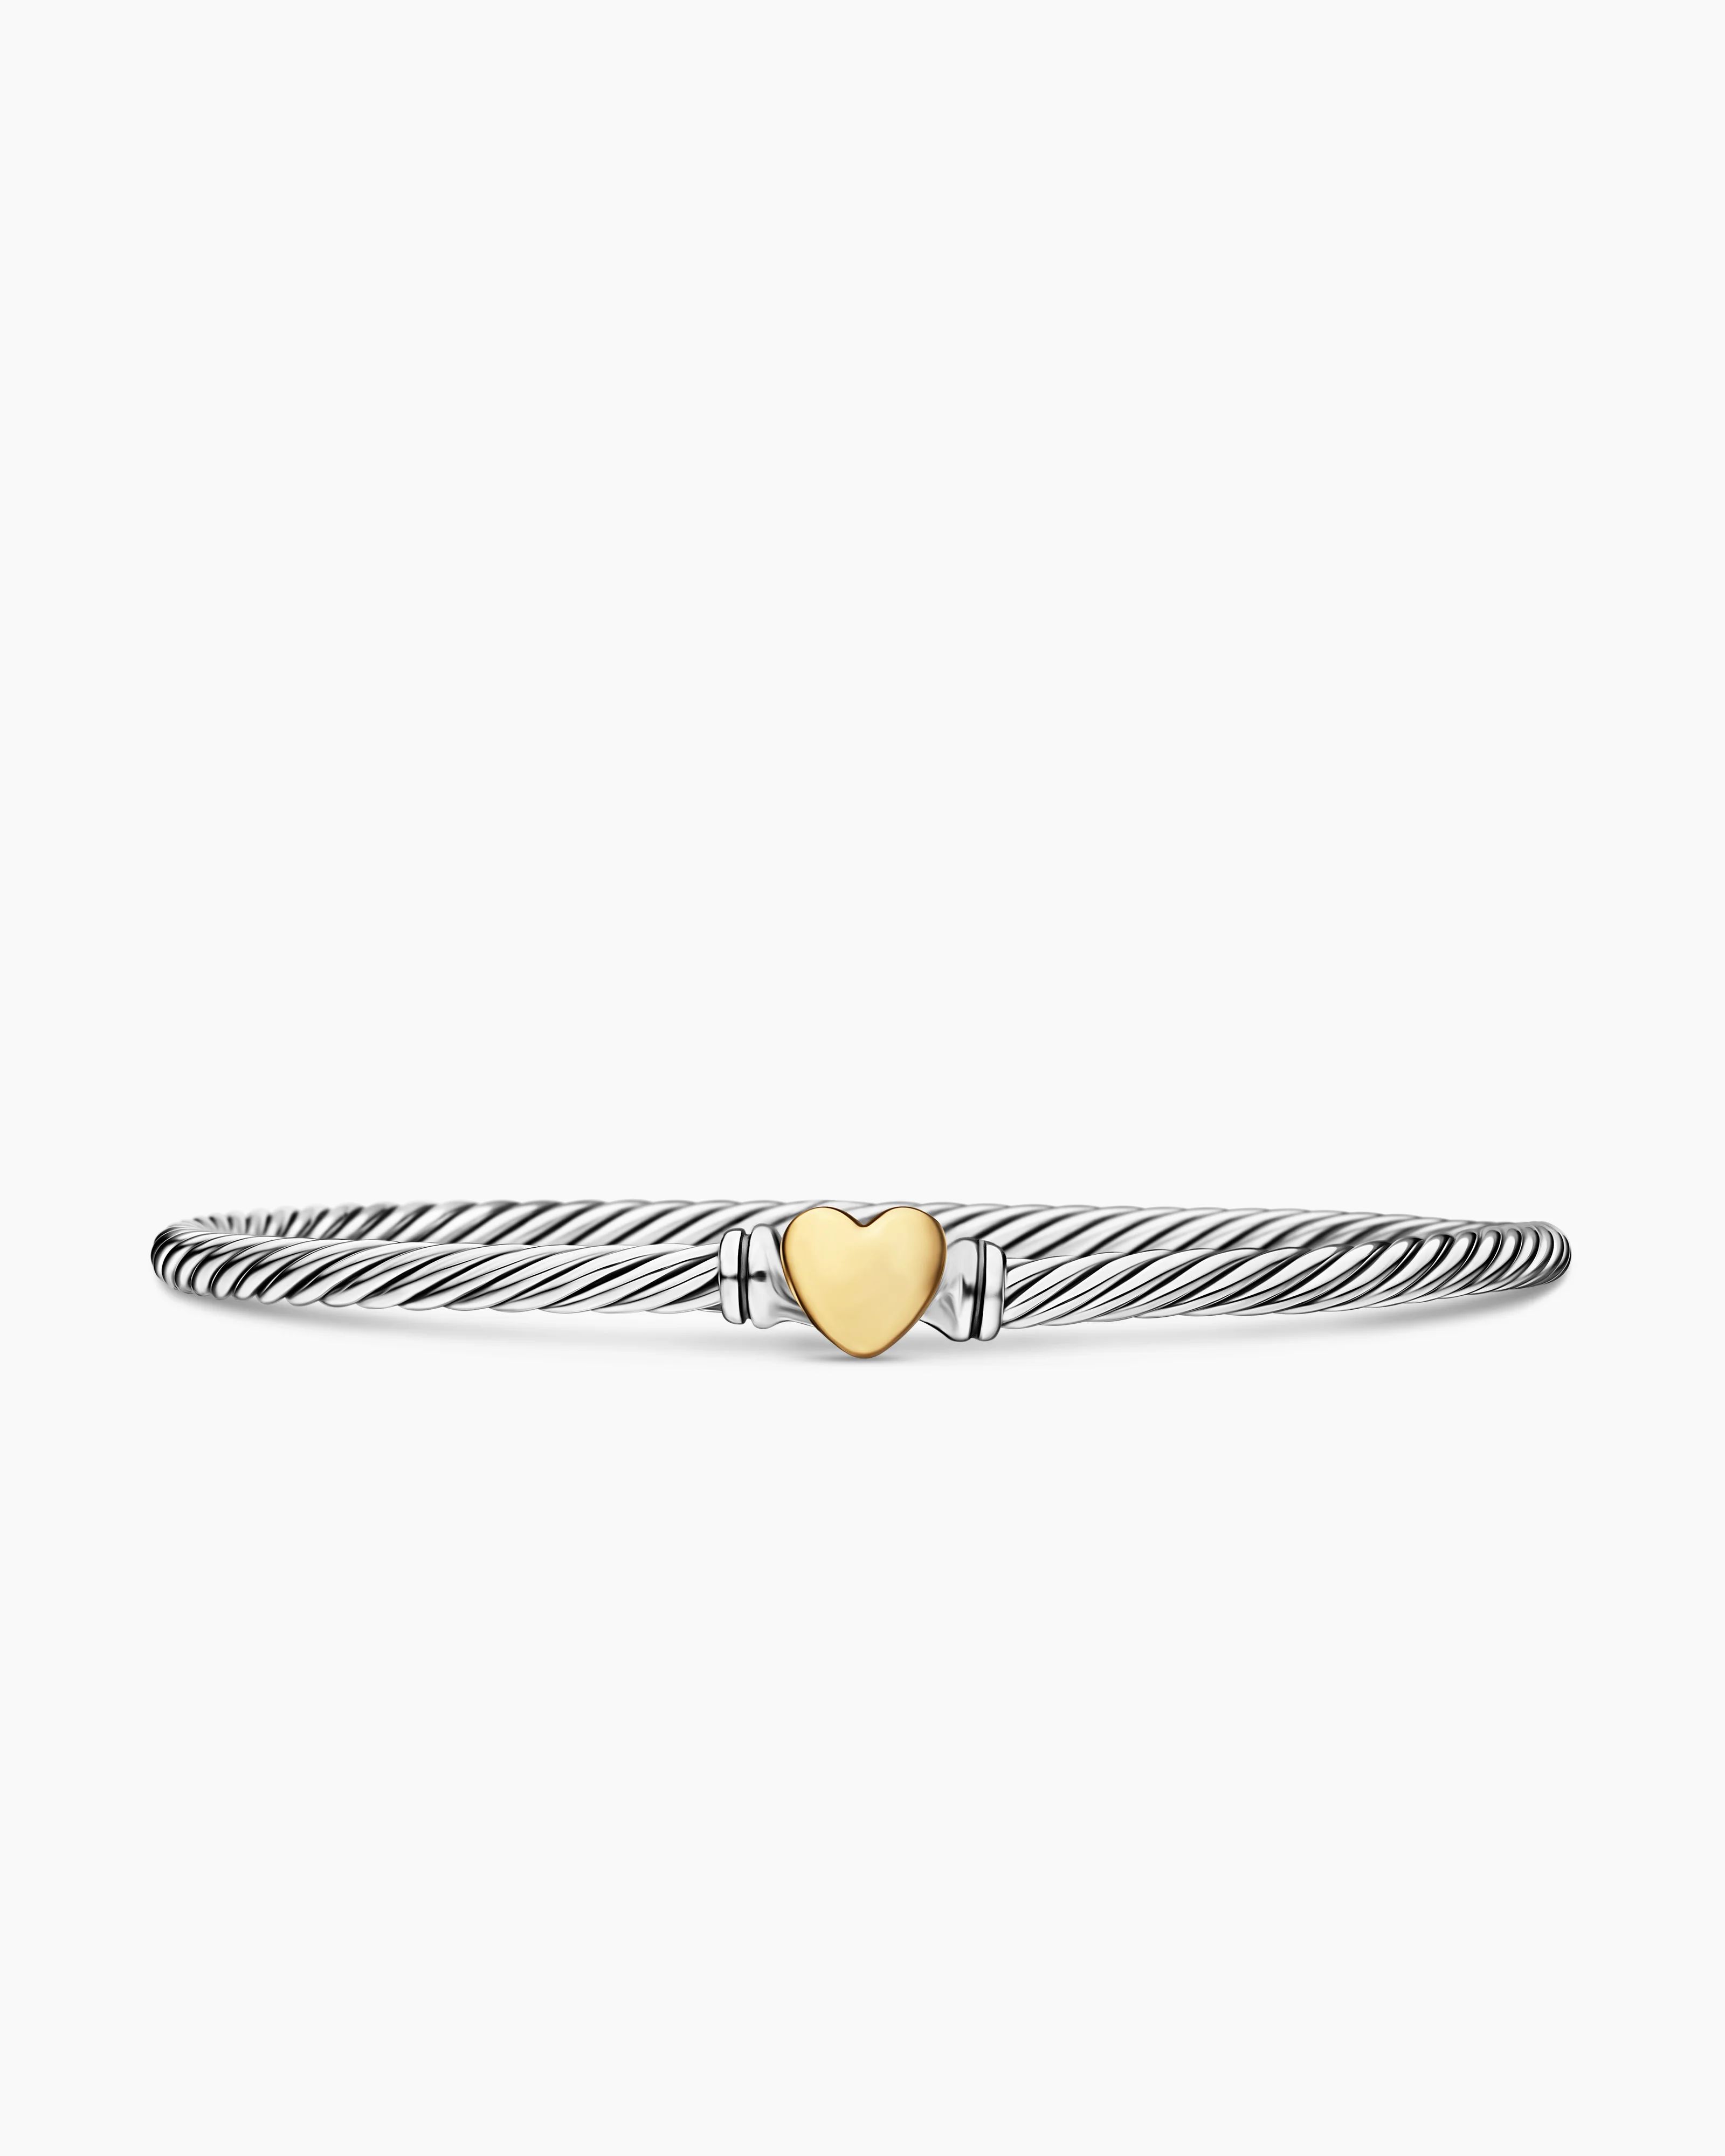 Cable Collectibles® Heart Bracelet

Sterling Silver with 18K Yellow Gold, 3mm | David Yurman